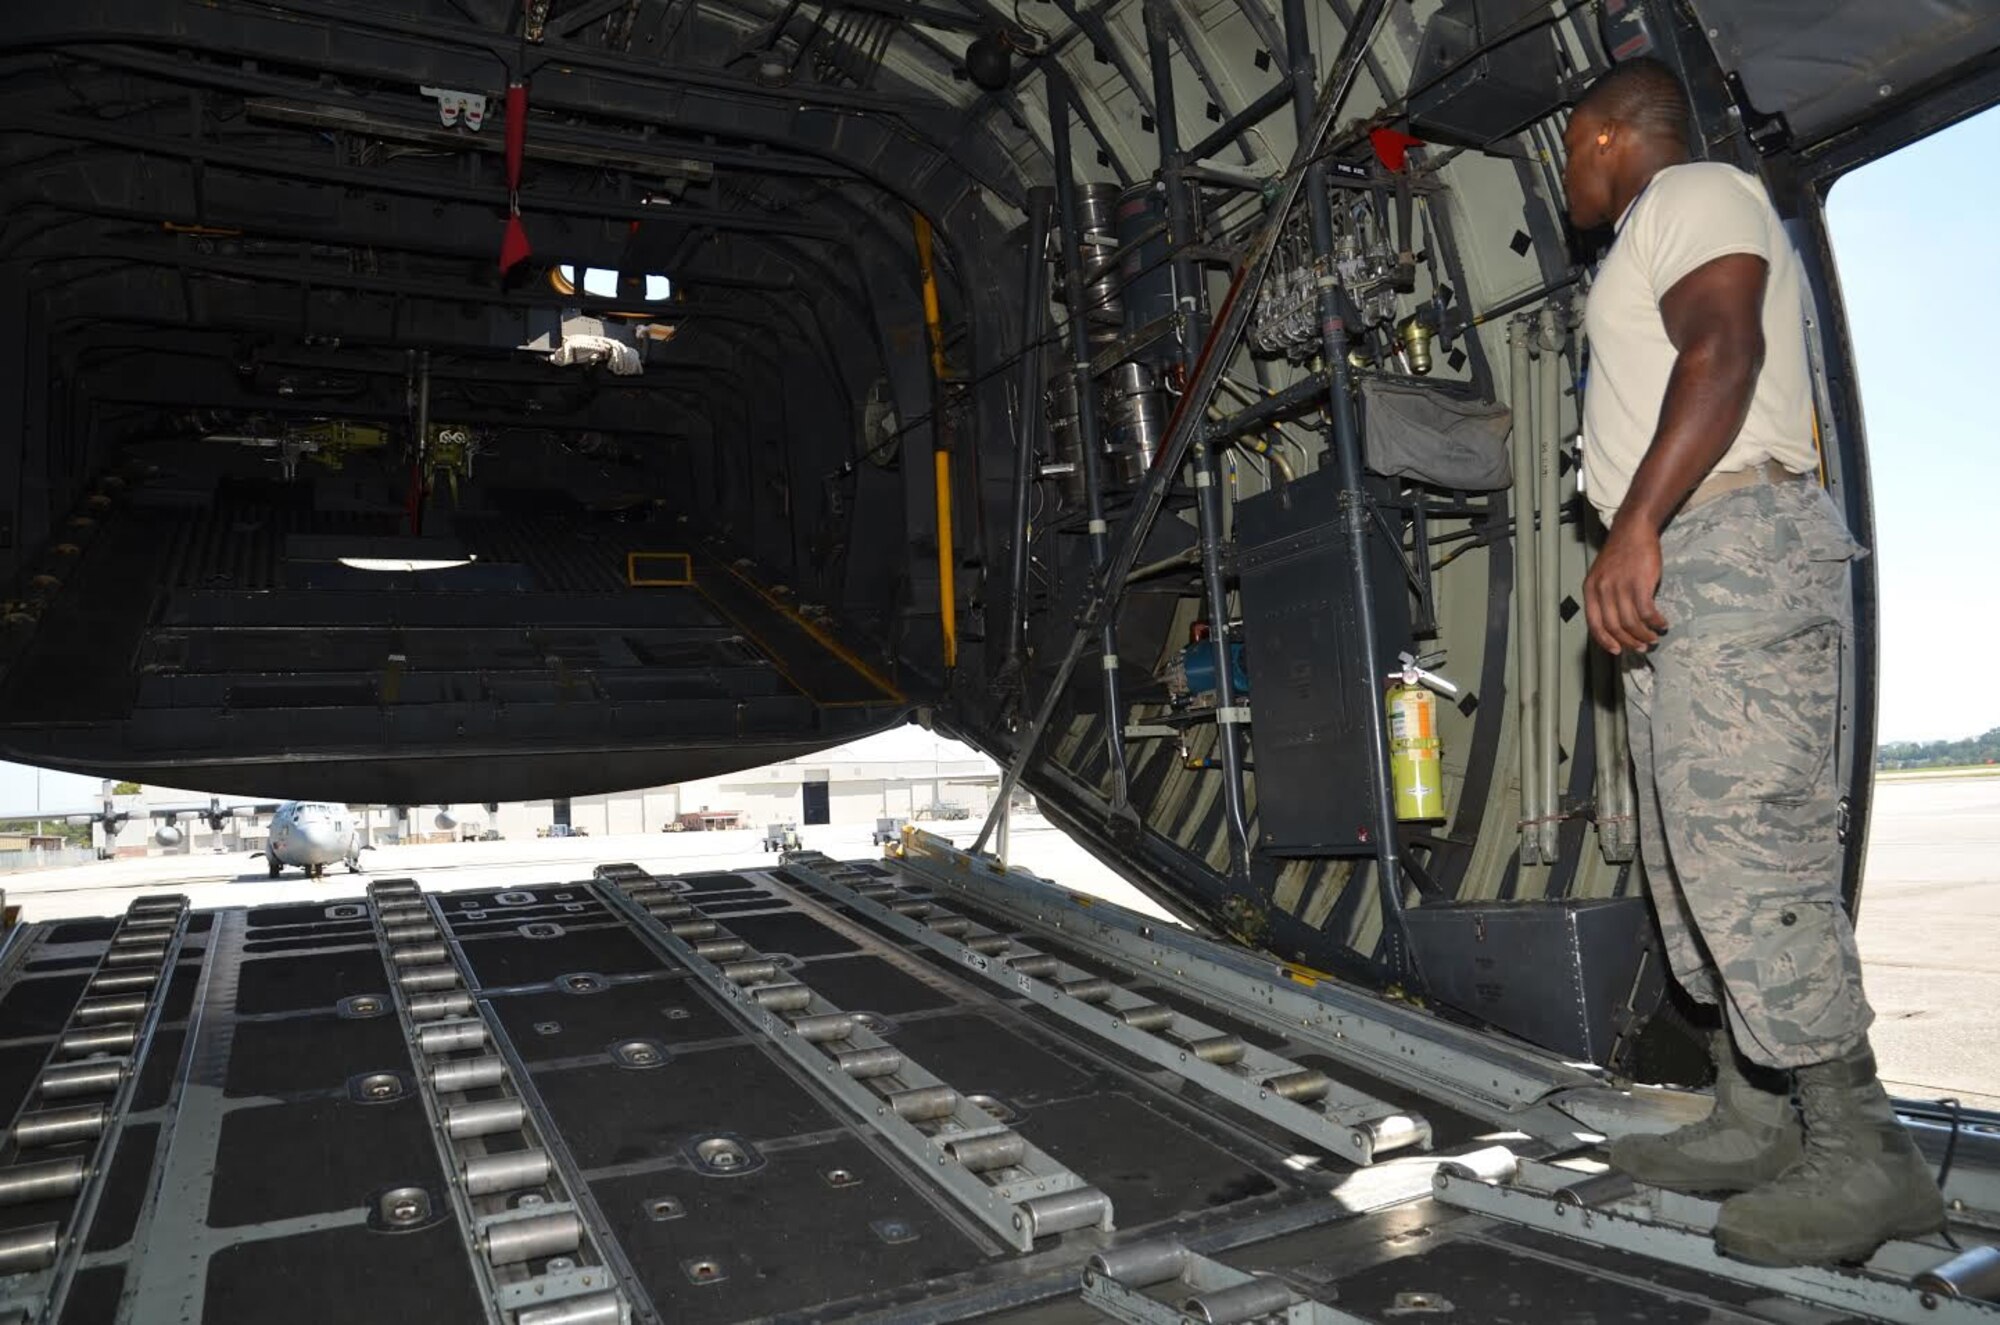 Staff Sgt. Malcolm Young, 94th Aircraft Maintenance Squadron hydraulics specialist, opens the rear ramp of a C-130 on the flight line at Dobbins Air Reserve Base, Georgia on September 29, 2016. Young is responsible for equipment in which hydraulic power is needed such as flight controls, landing gear, steering, brakes, etc. (U.S. Air Force photo by Senior Airman Lauren Douglas) 